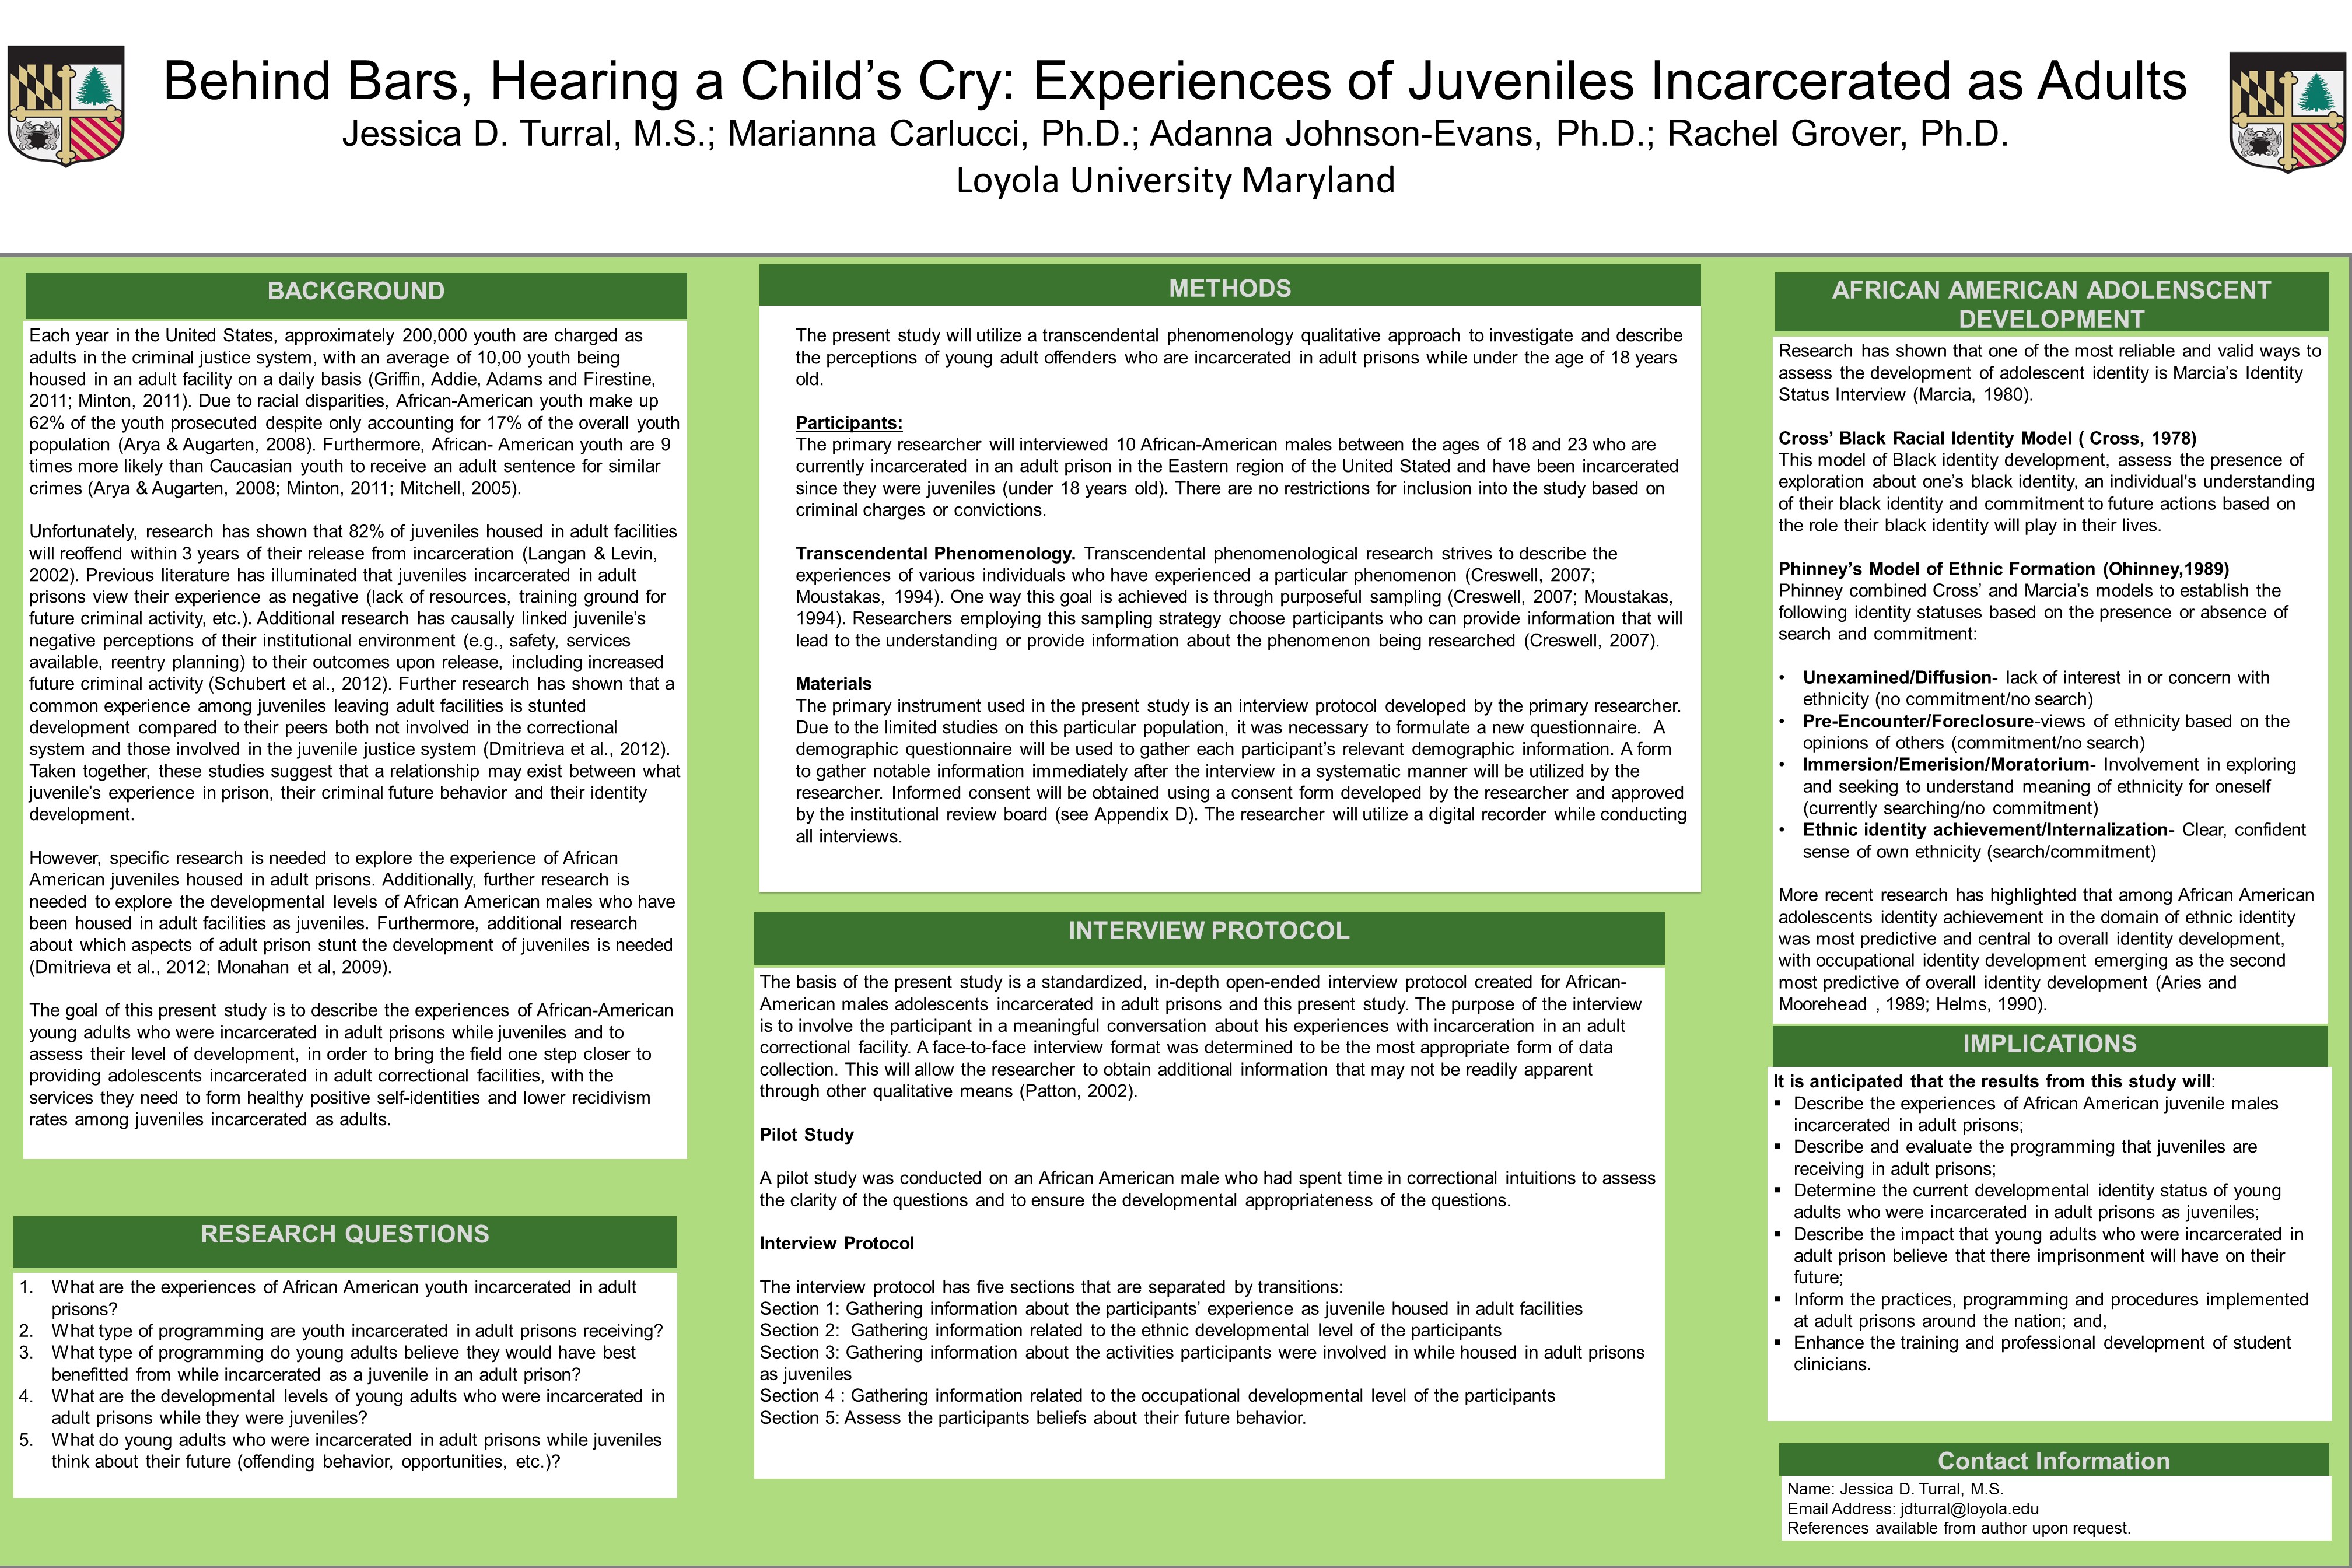 poster image: Behind Bars, Hearing a Child’s Cry: Experiences of Juveniles Incarcerated as Adults